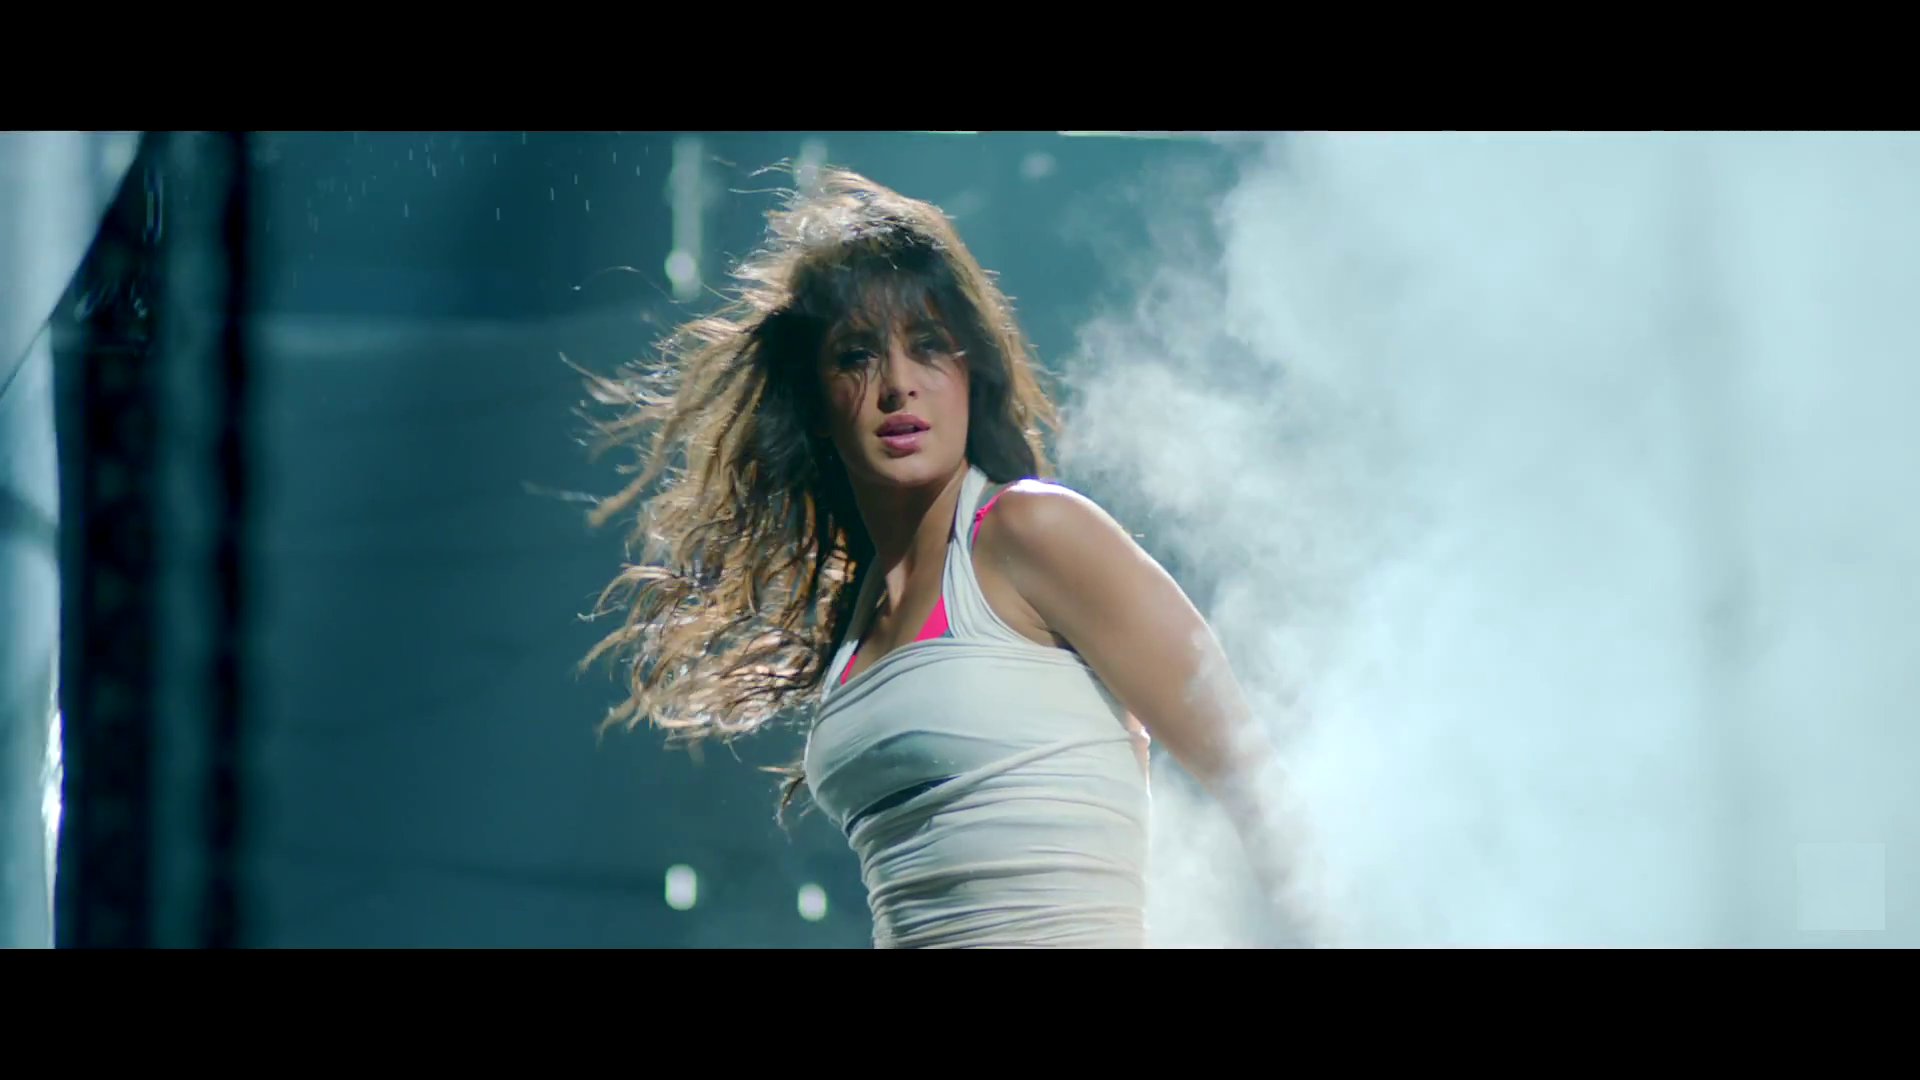 Hot Crazy Katrina Kaif in Dhoom 3 Movie | HD Wallpapers